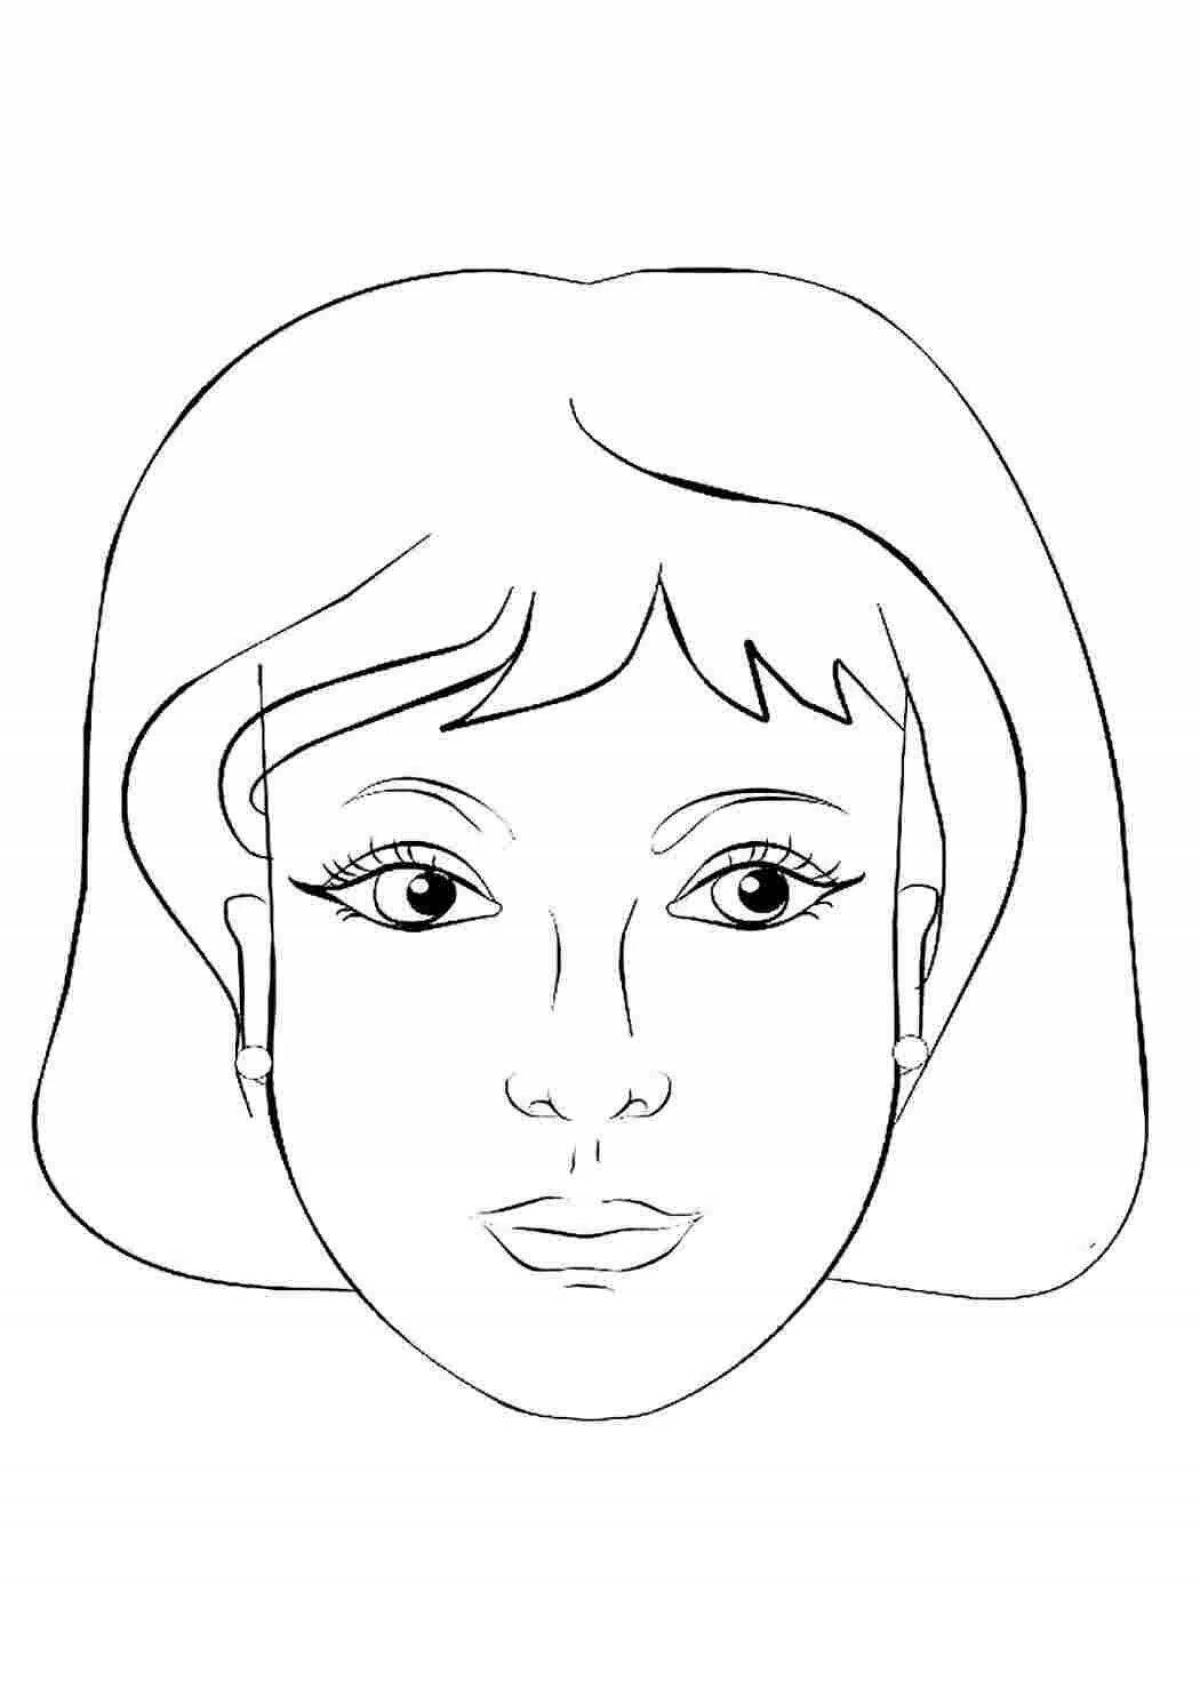 Animated face drawing